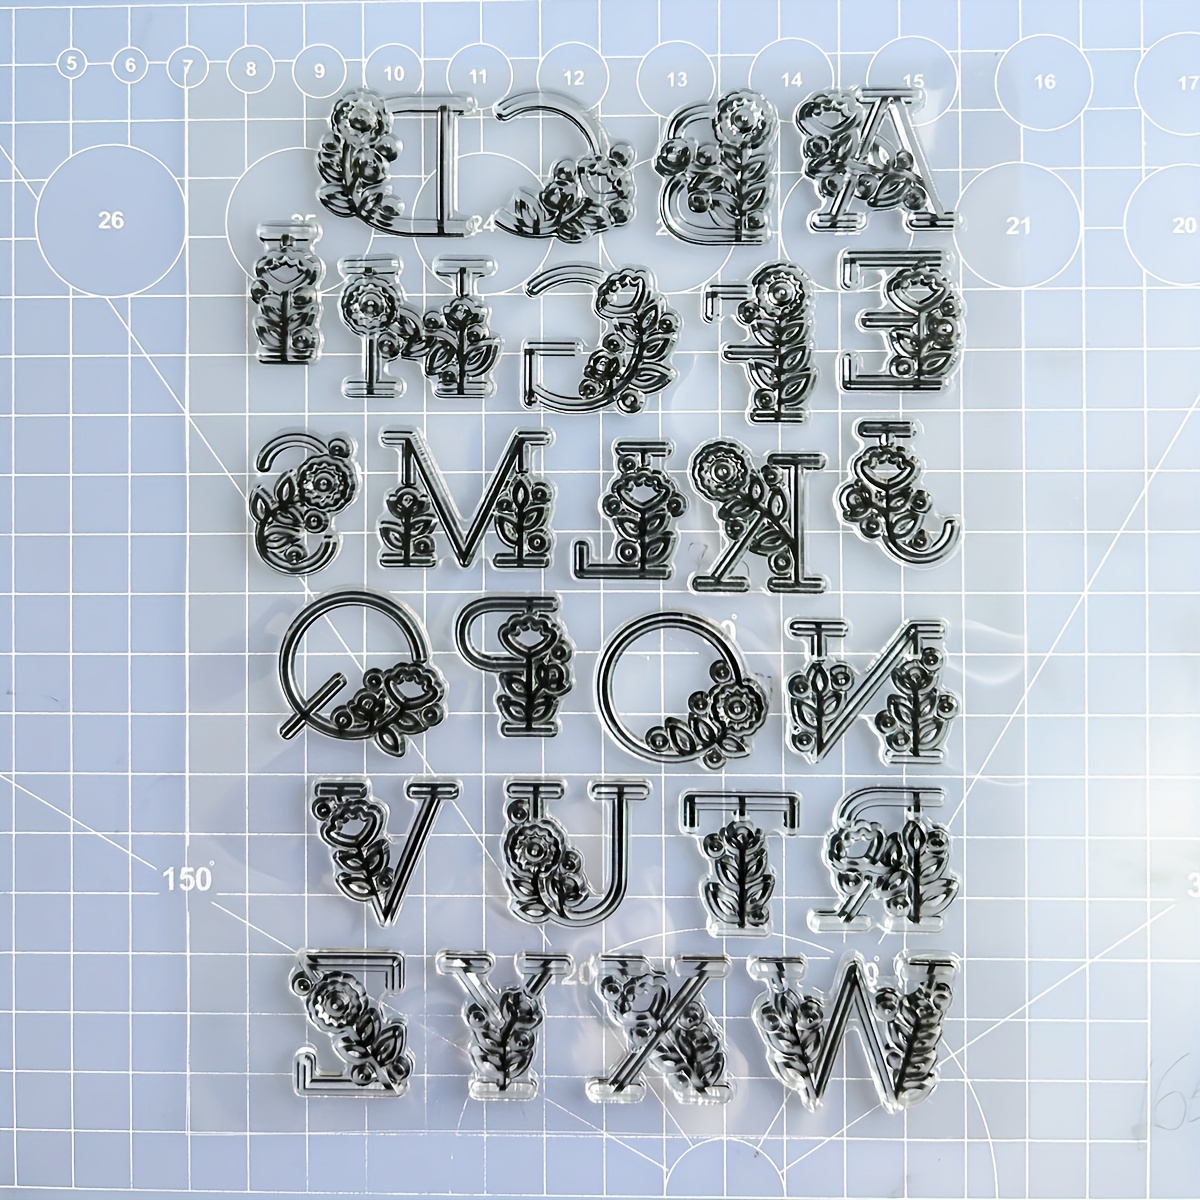  30 Pieces Mini Alphabet Rubber Stamps and Symbols for Crafts,  Letters, DIY Cards, Scrapbooking (0.65 x1 in) Brown : Arts, Crafts & Sewing